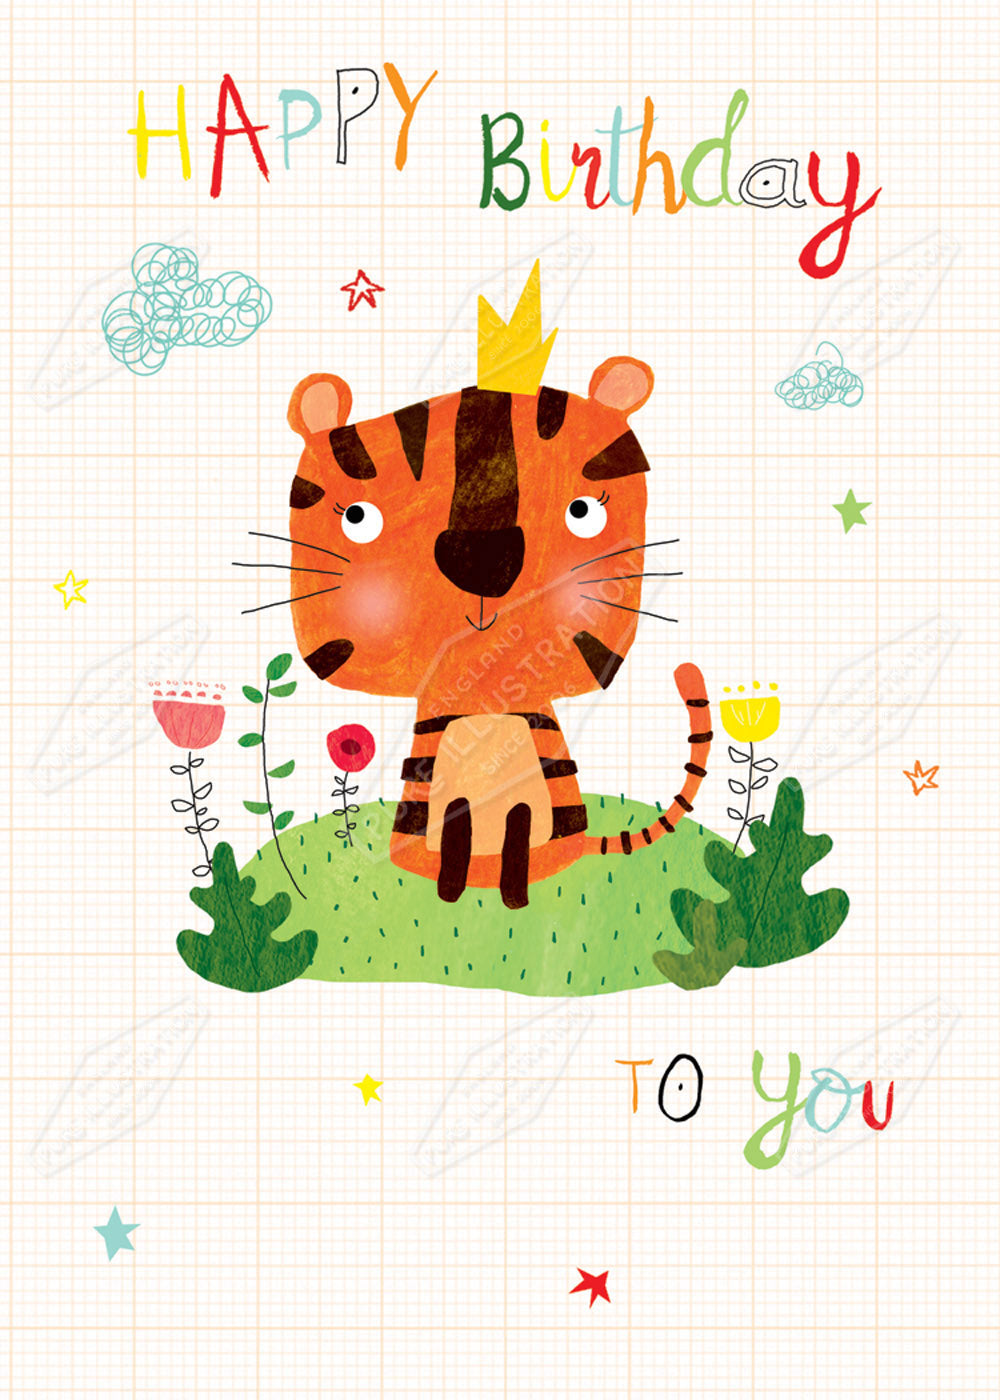 Birthday Tiger Greeting Card Design by Cory Reid for Pure Art Licensing Agency & Surface Design Studio